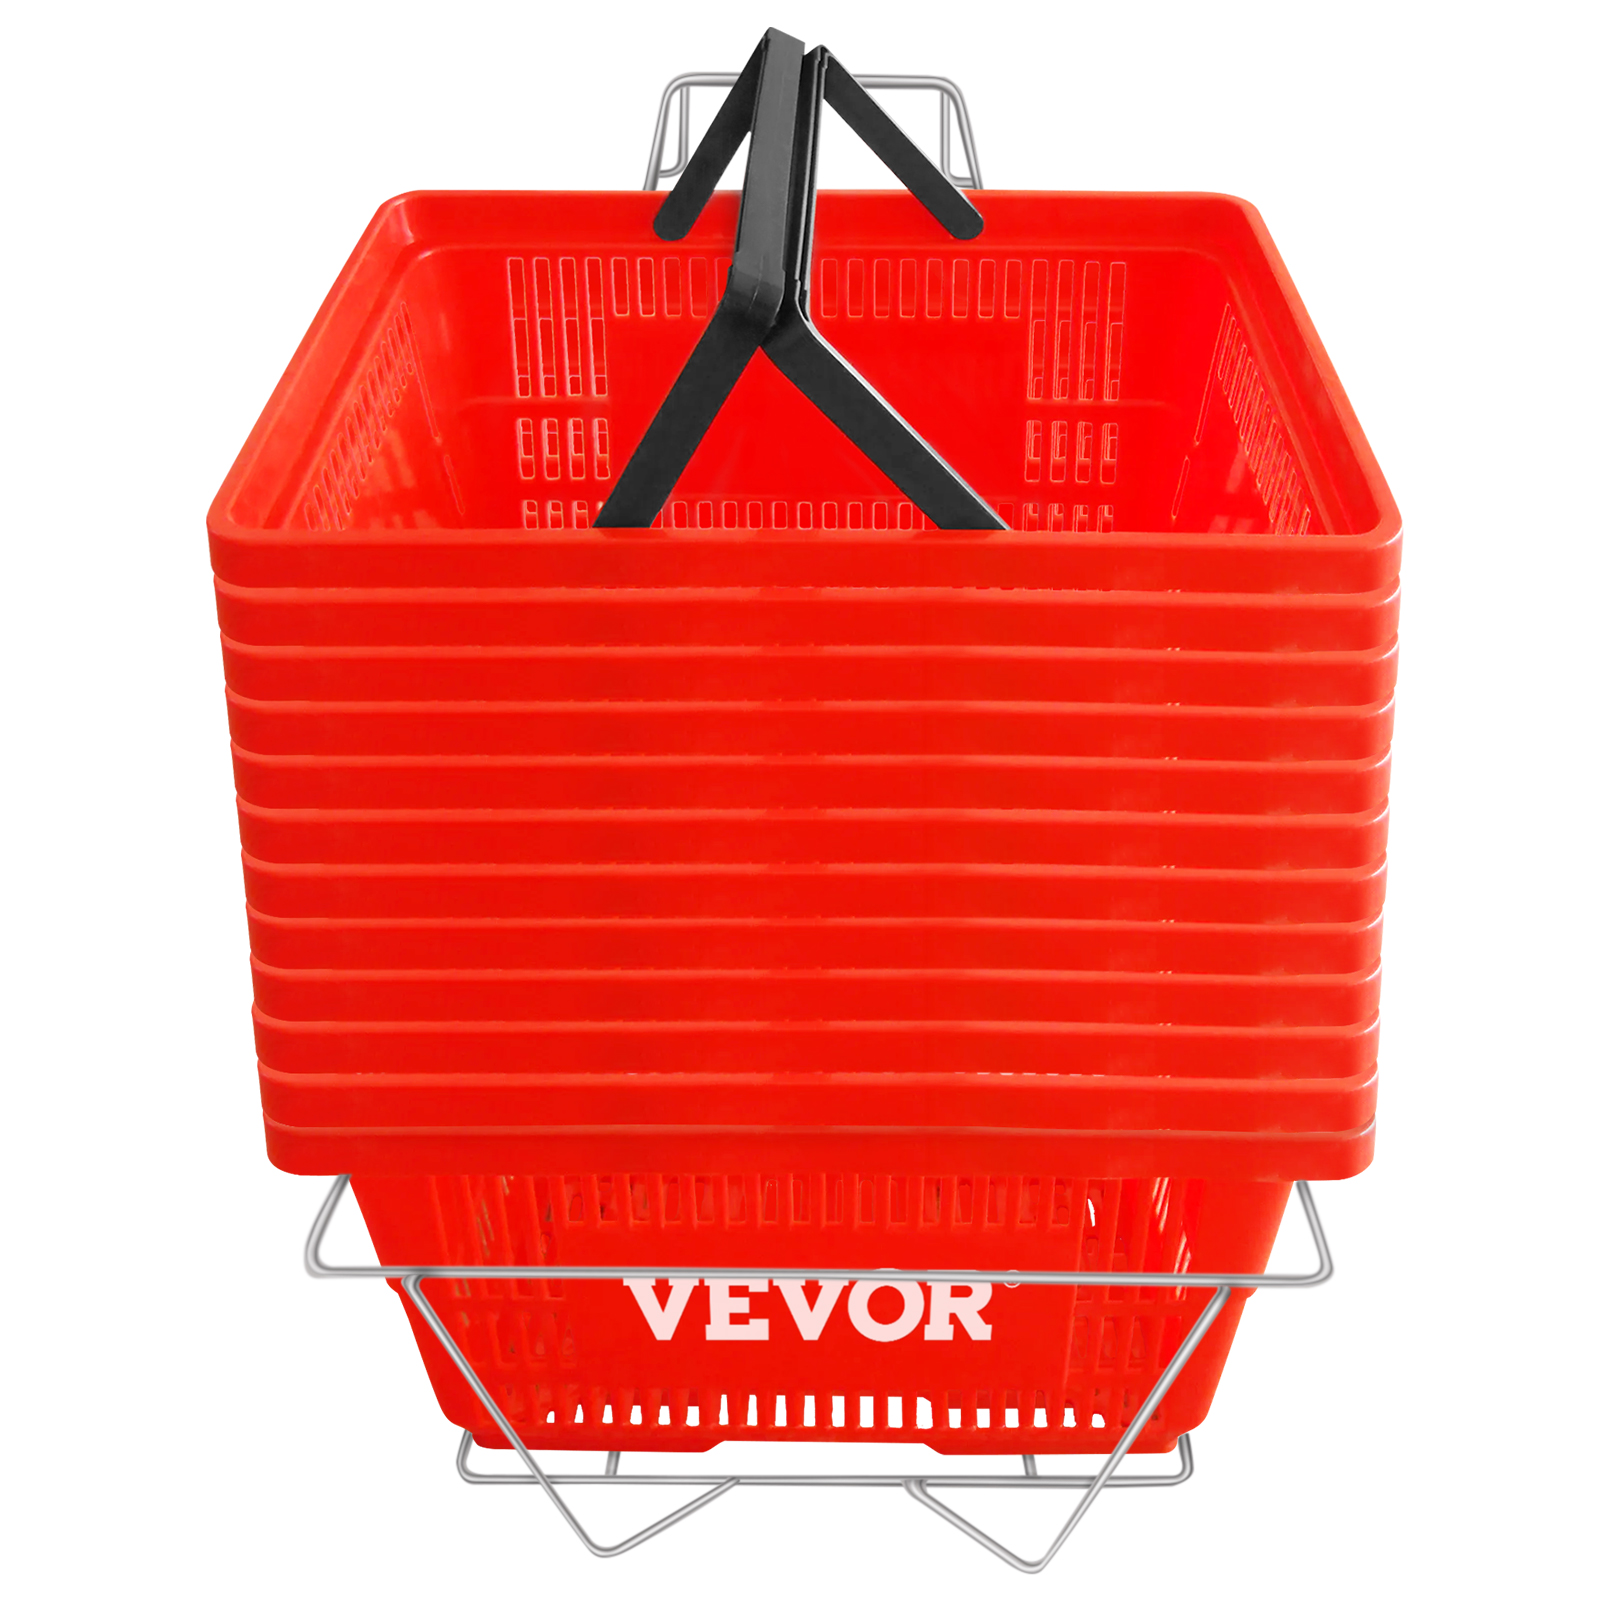 Shopping basket,75 lbs/34 kg Capacity,Red